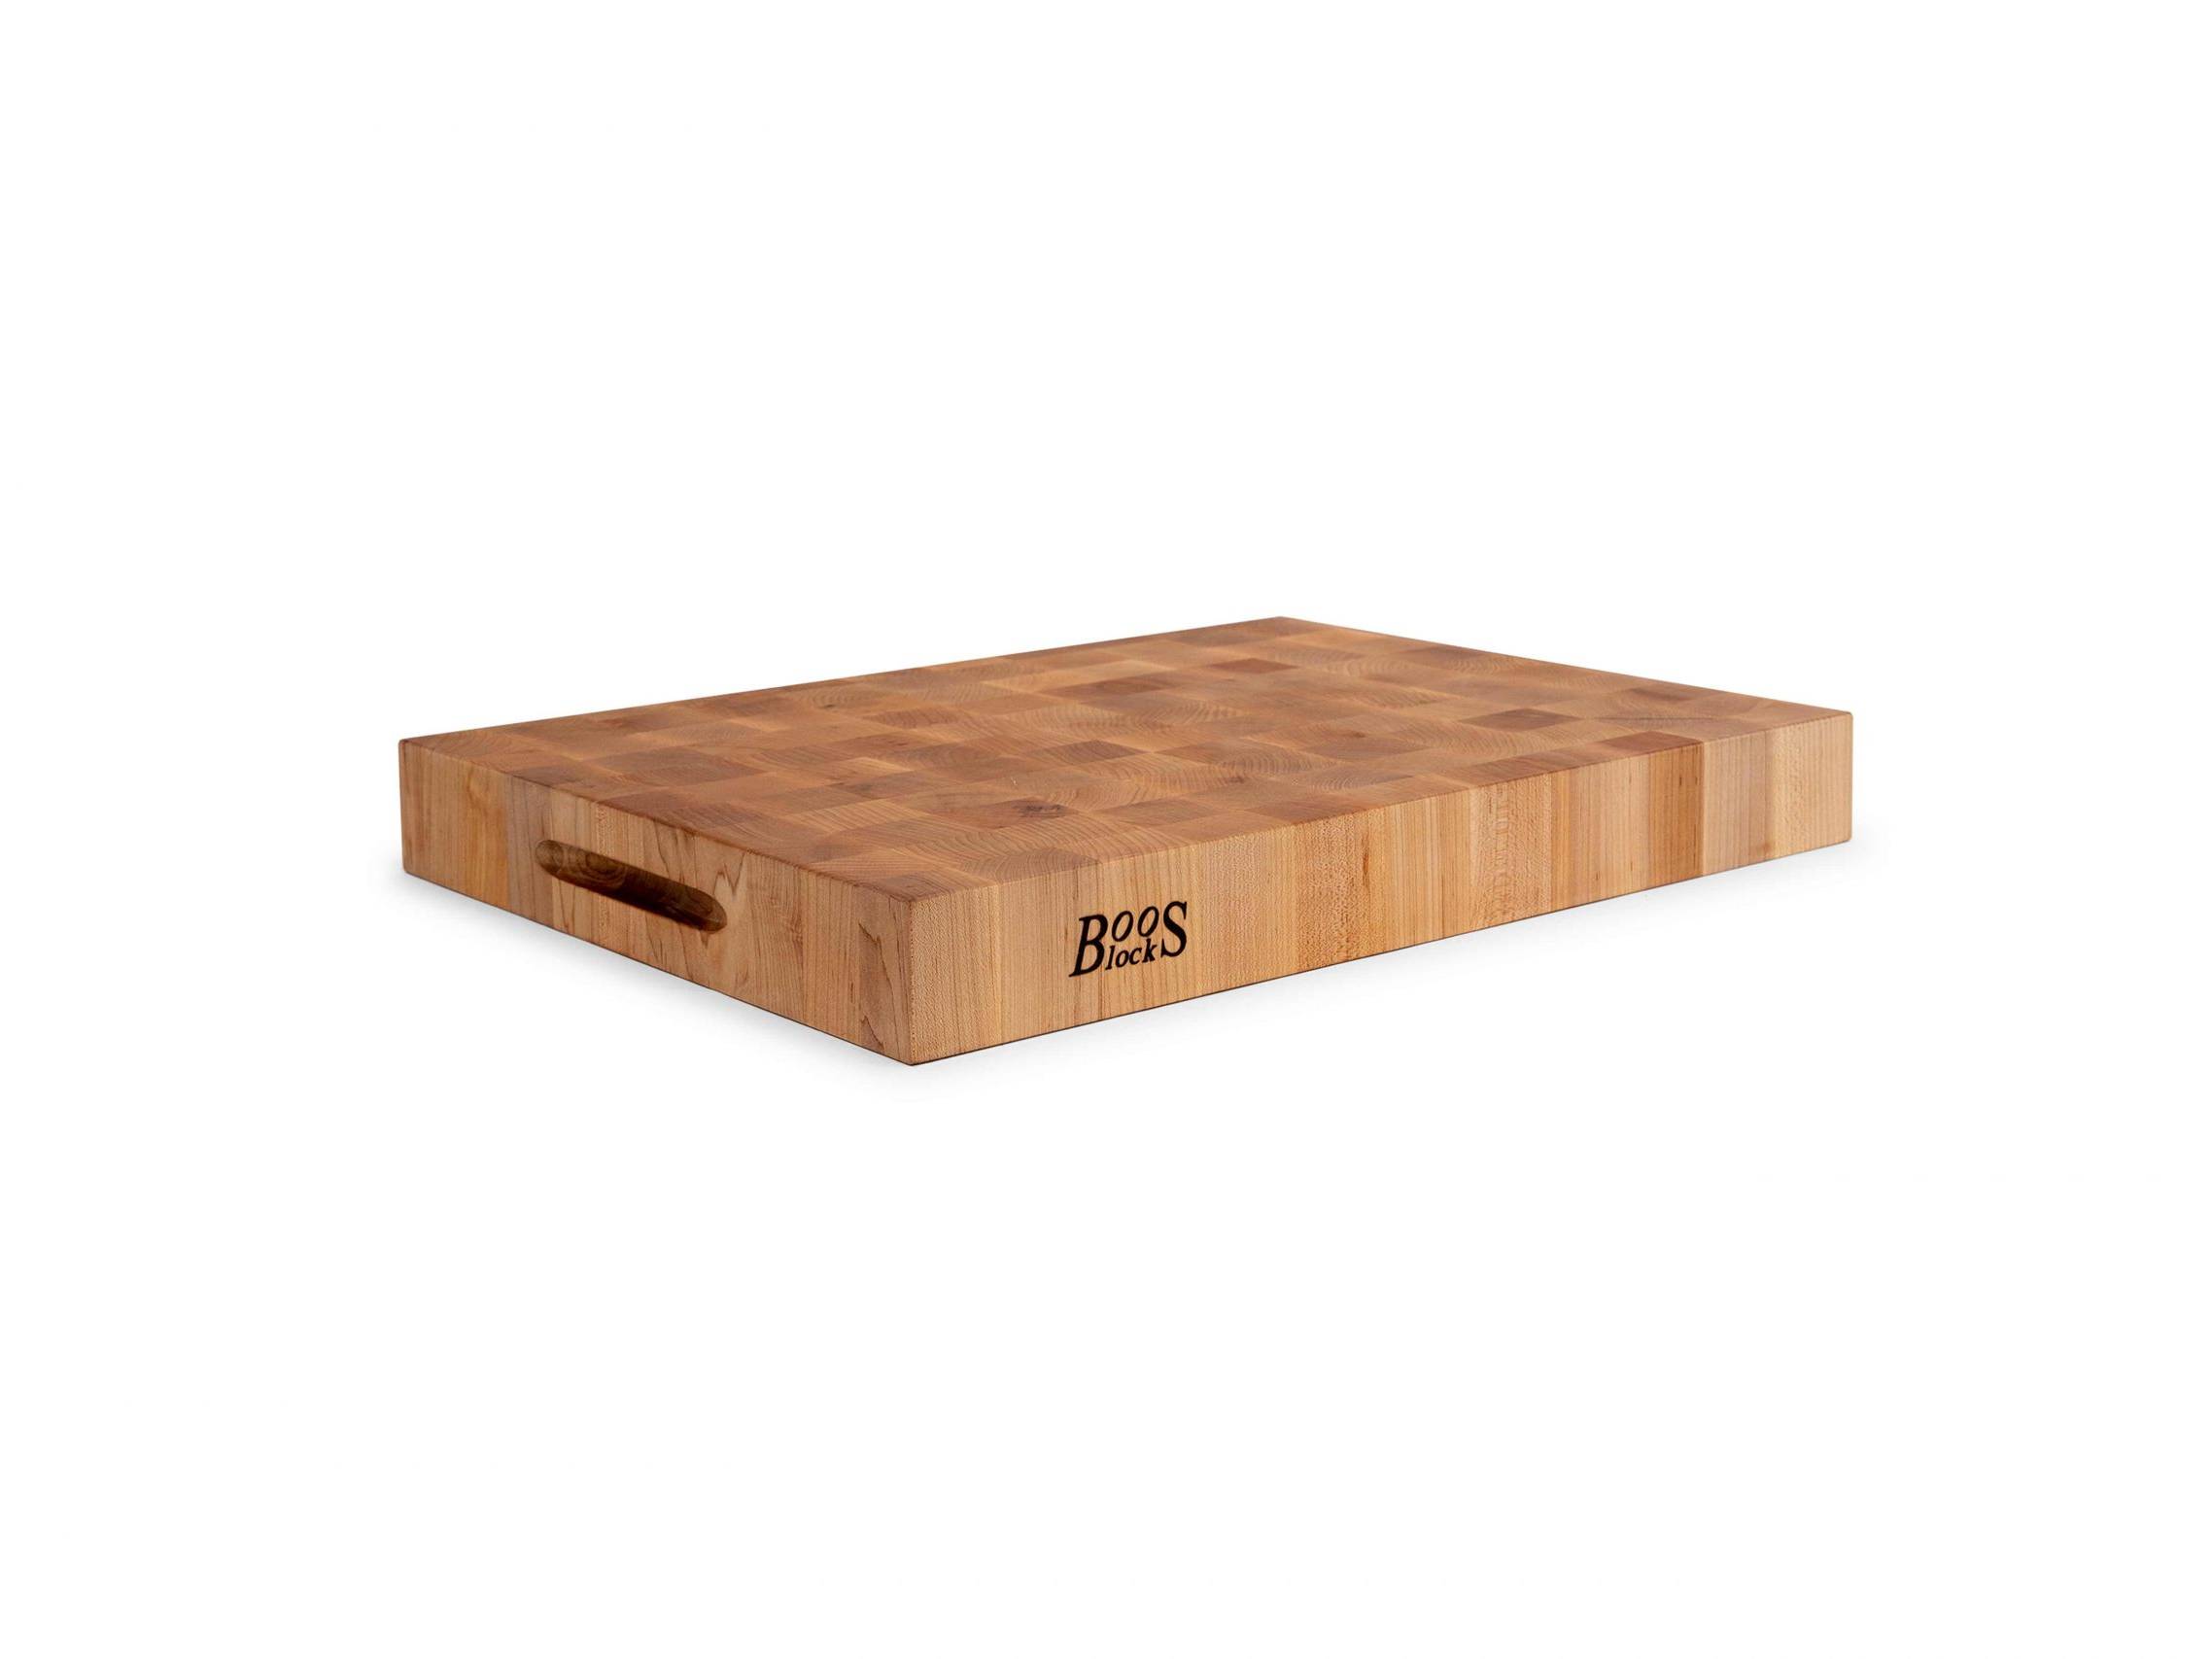 Boos® Hard Maple face wood chopping board with recessed grips; can be used on both sides 57